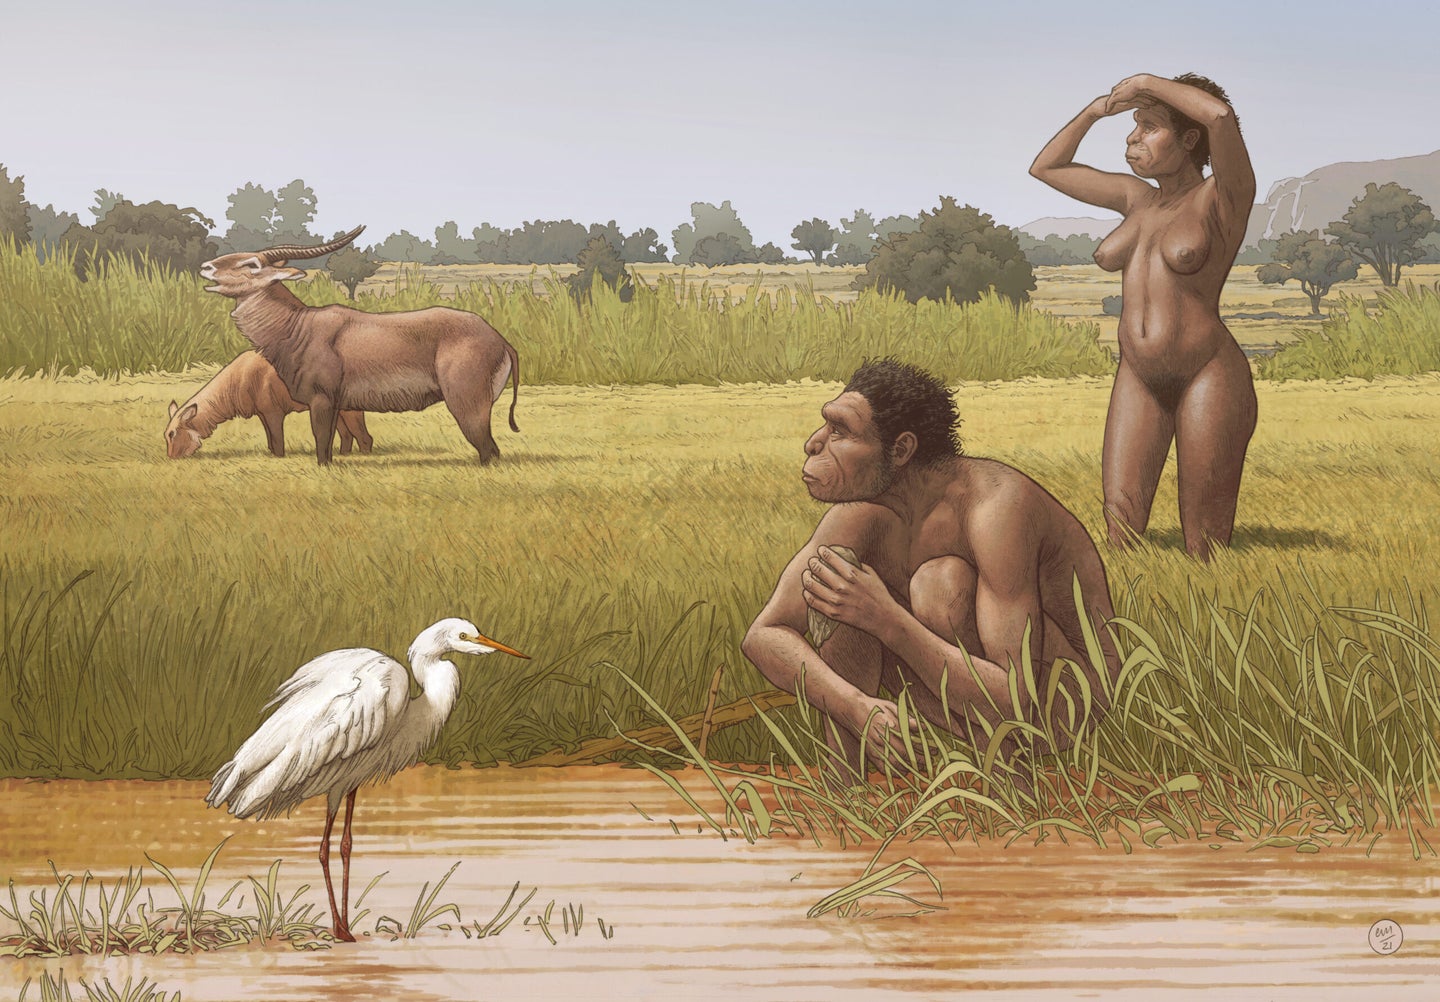 an illustration of two human ancestors in africa